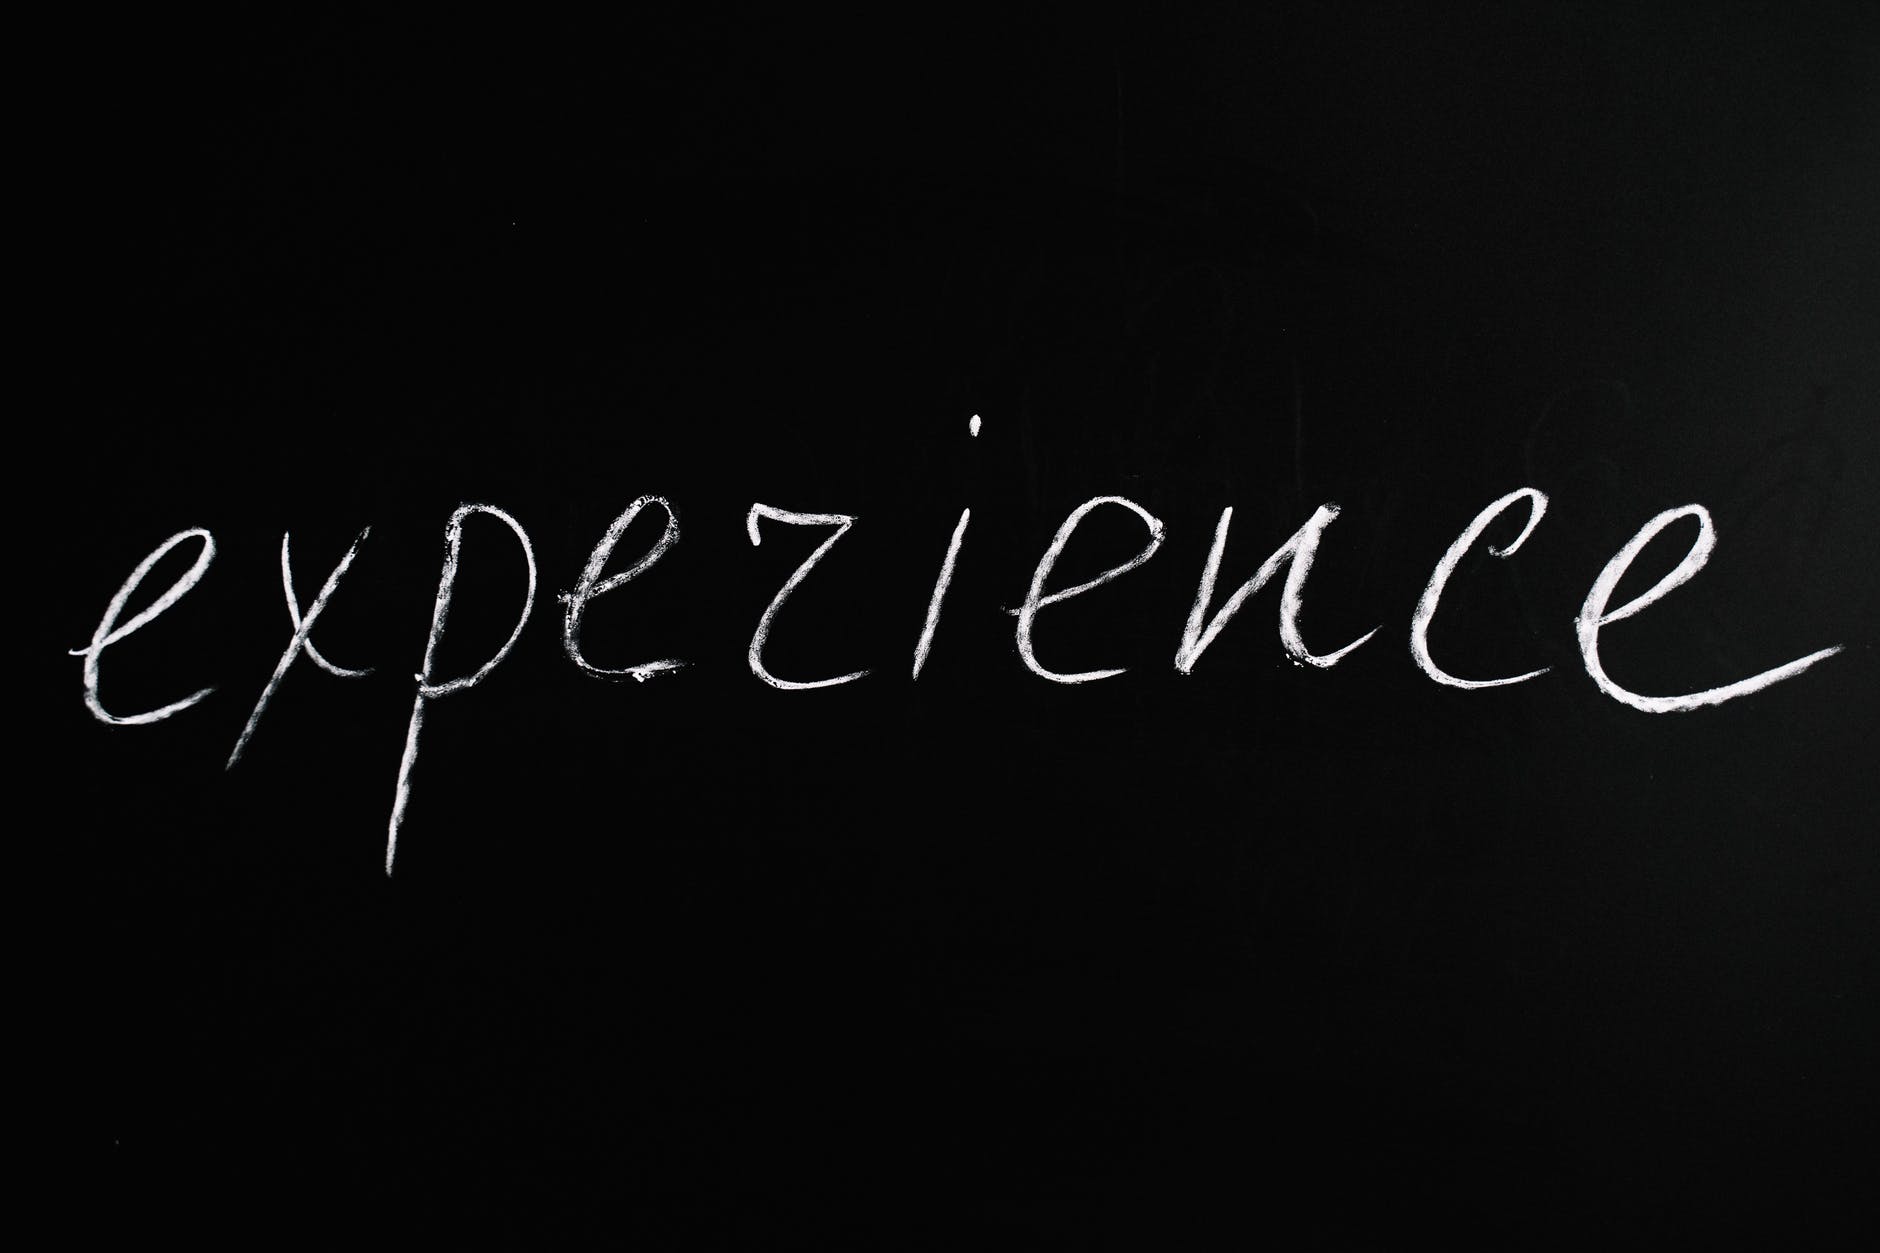 experience lettering text on black background